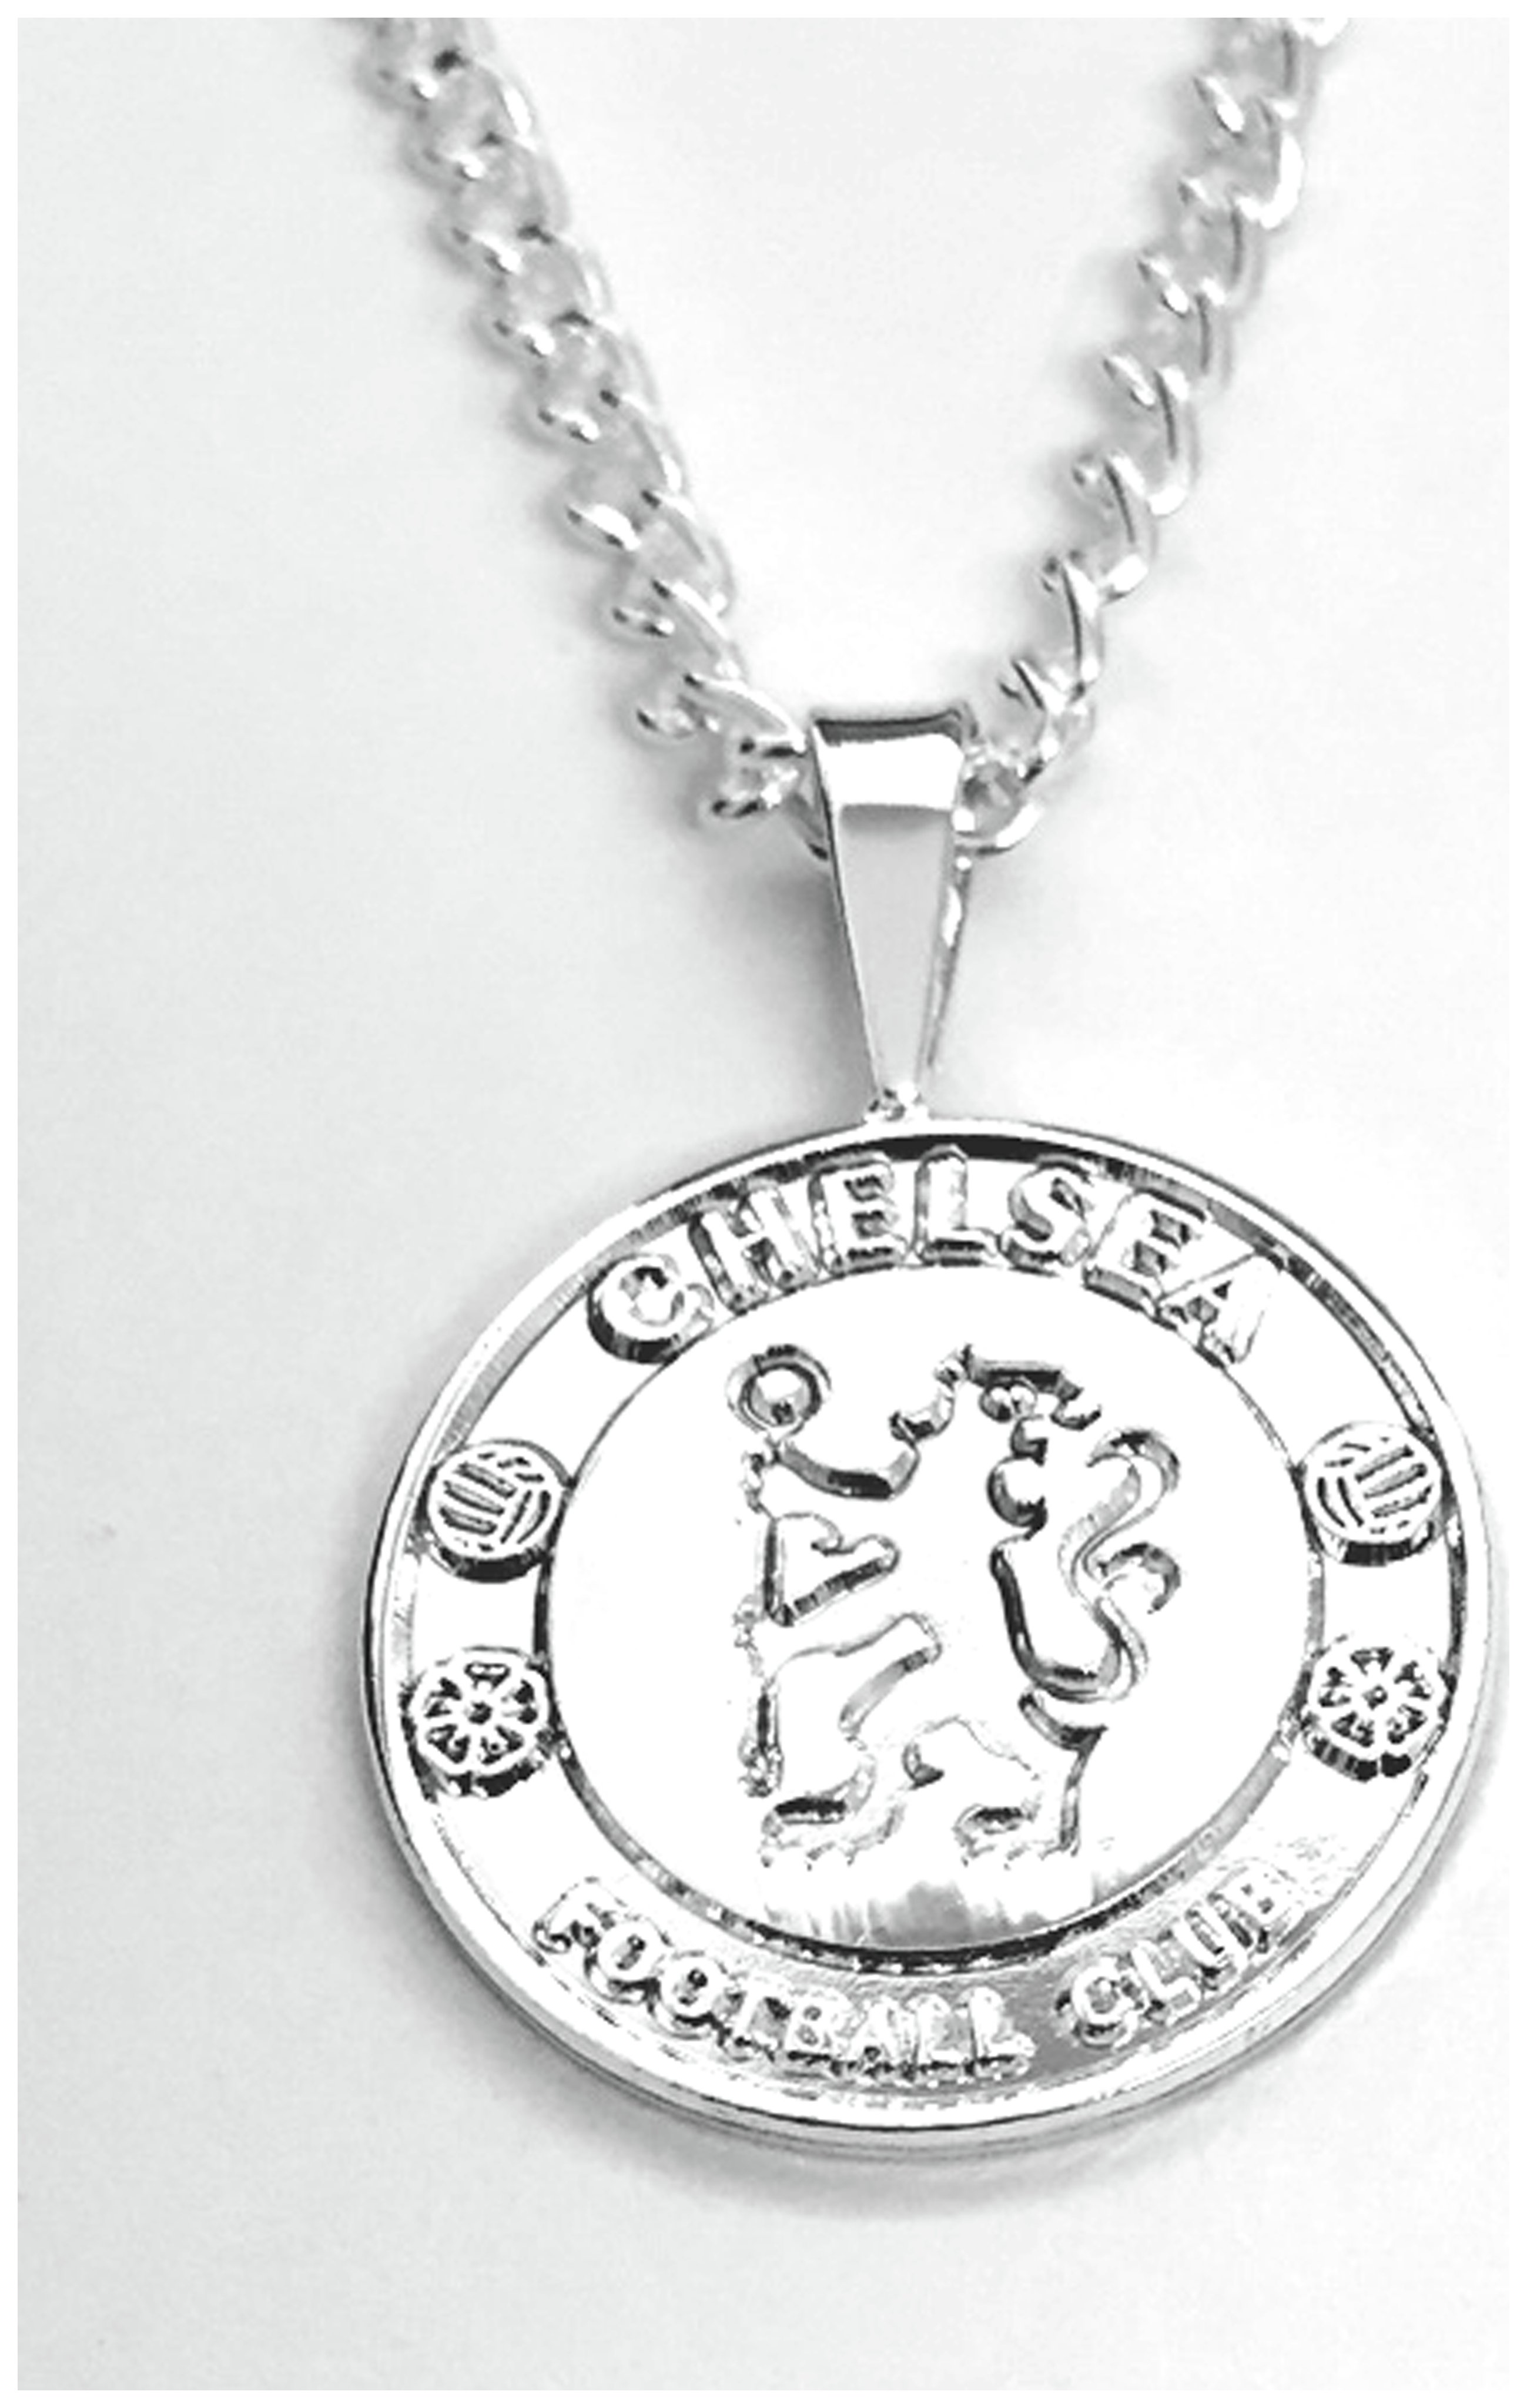 Silver Plated Chelsea Pendant and Chain.